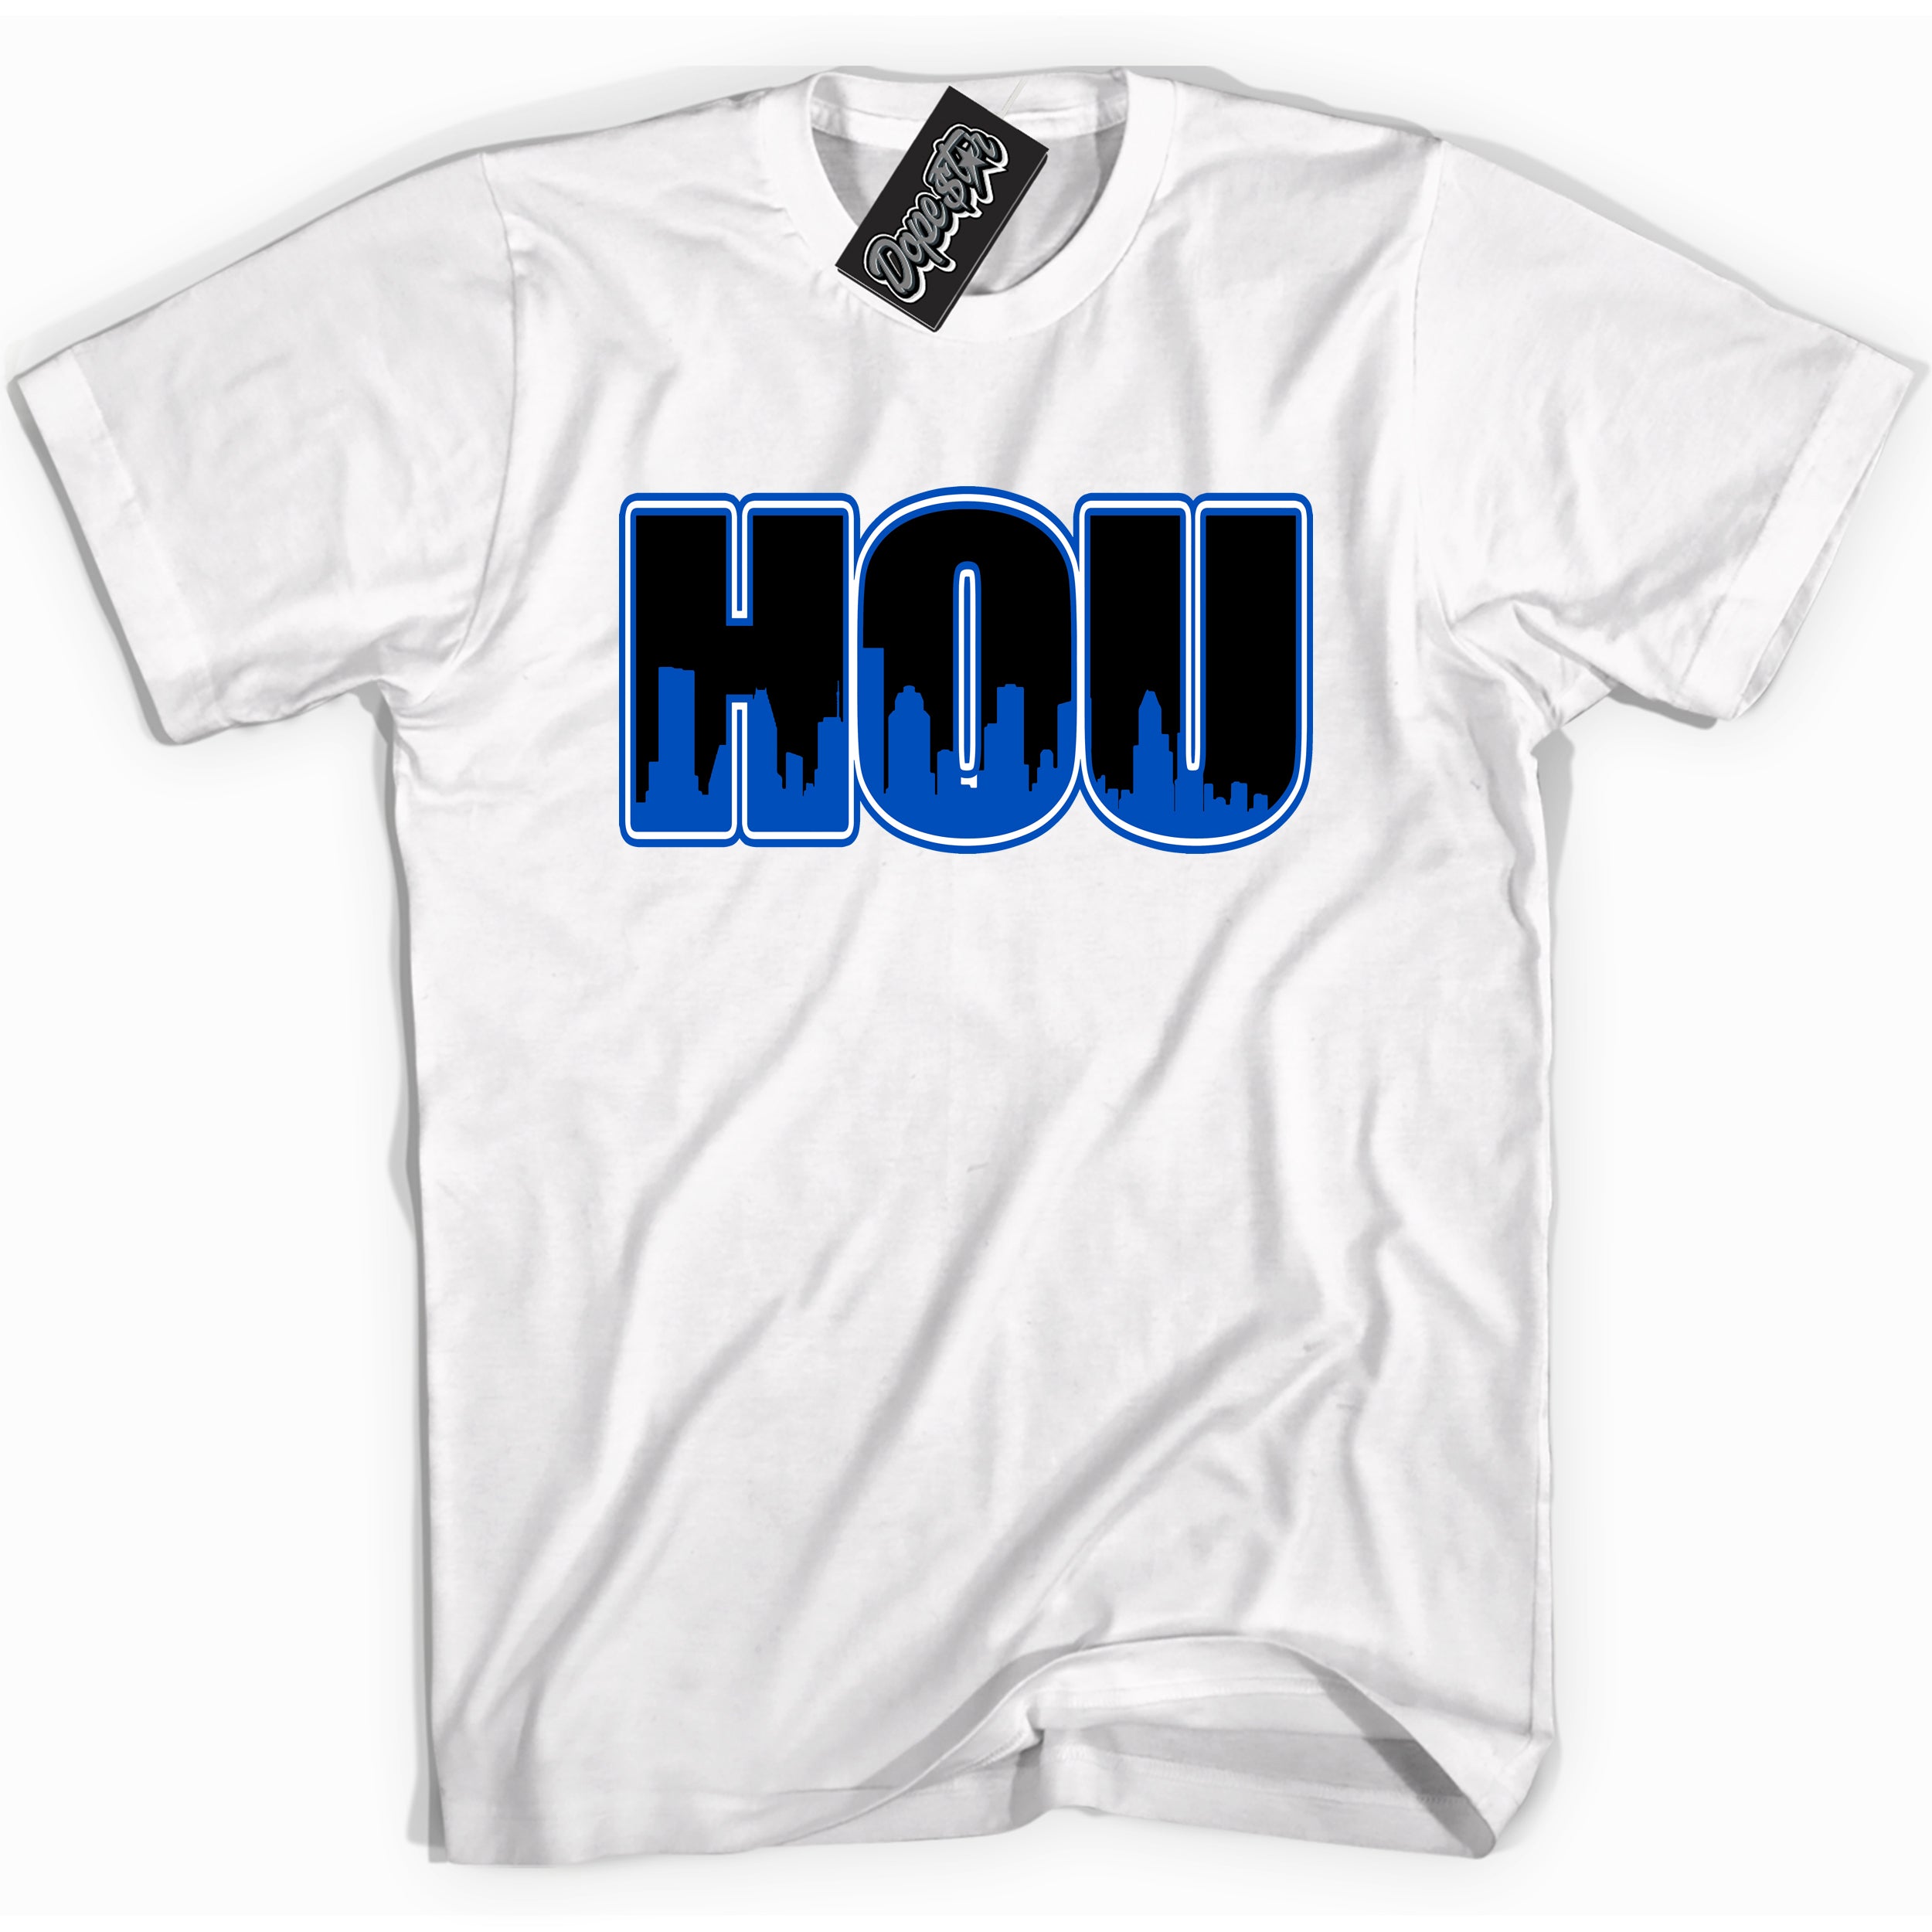 Cool White graphic tee with Houston print, that perfectly matches OG Royal Reimagined 1s sneakers 